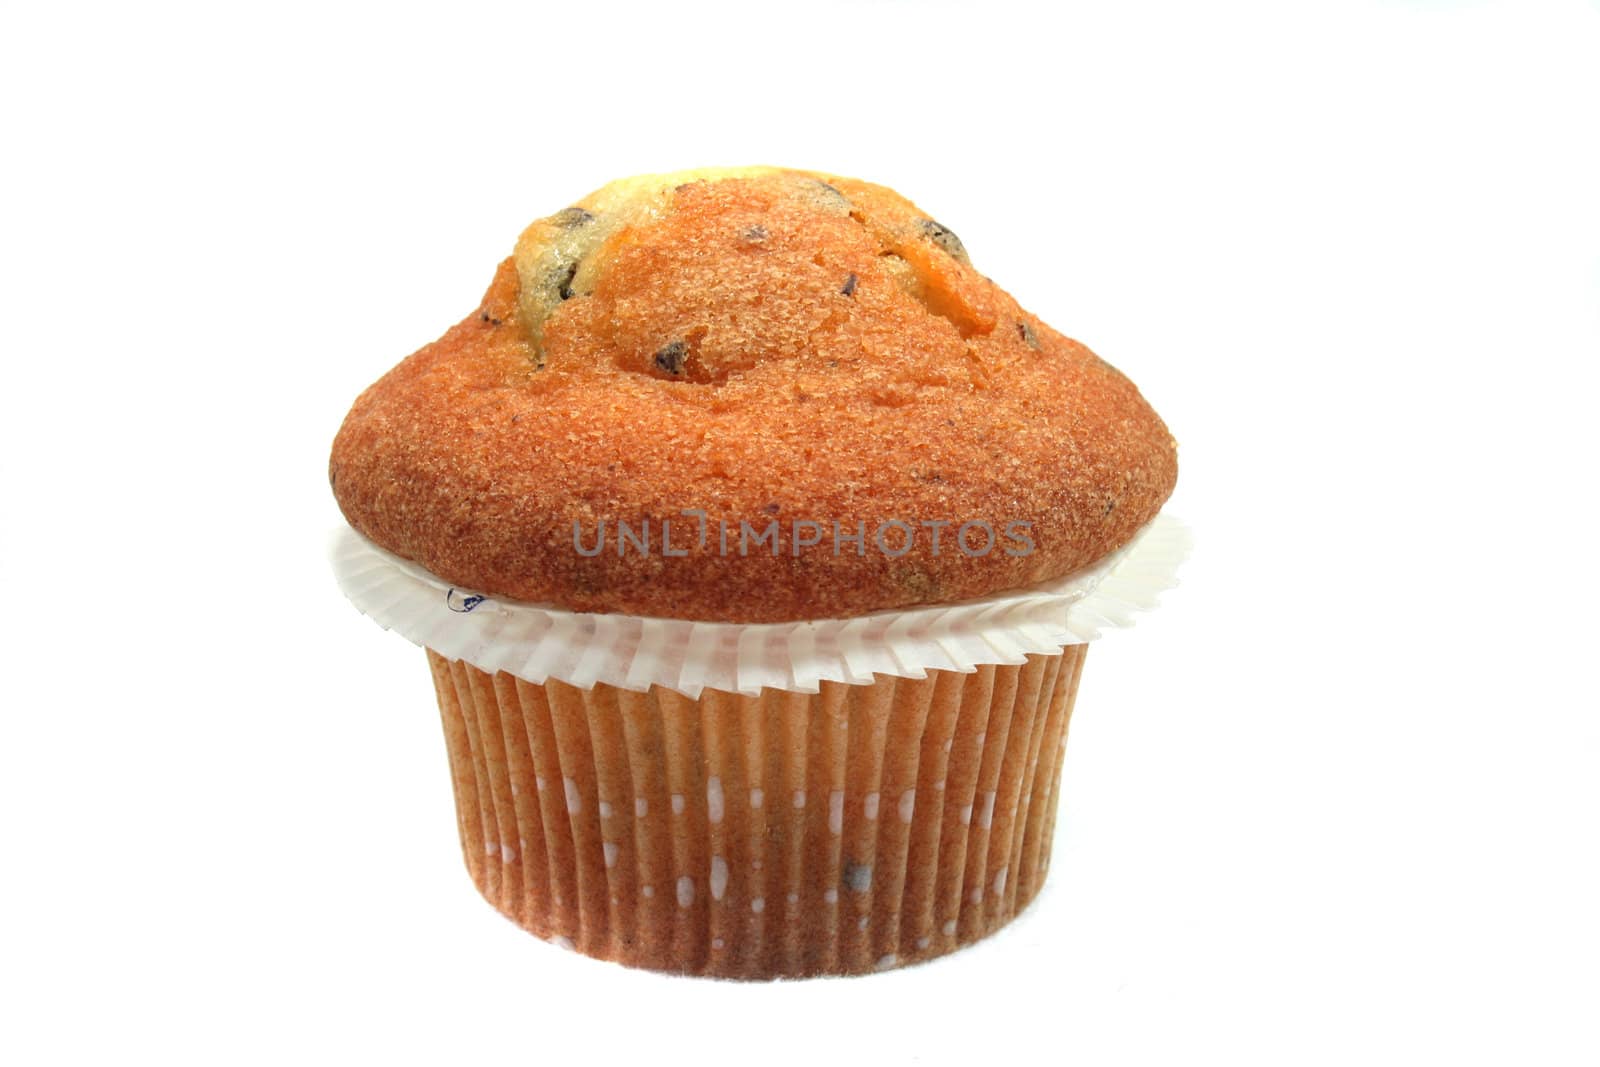 Muffin by silencefoto